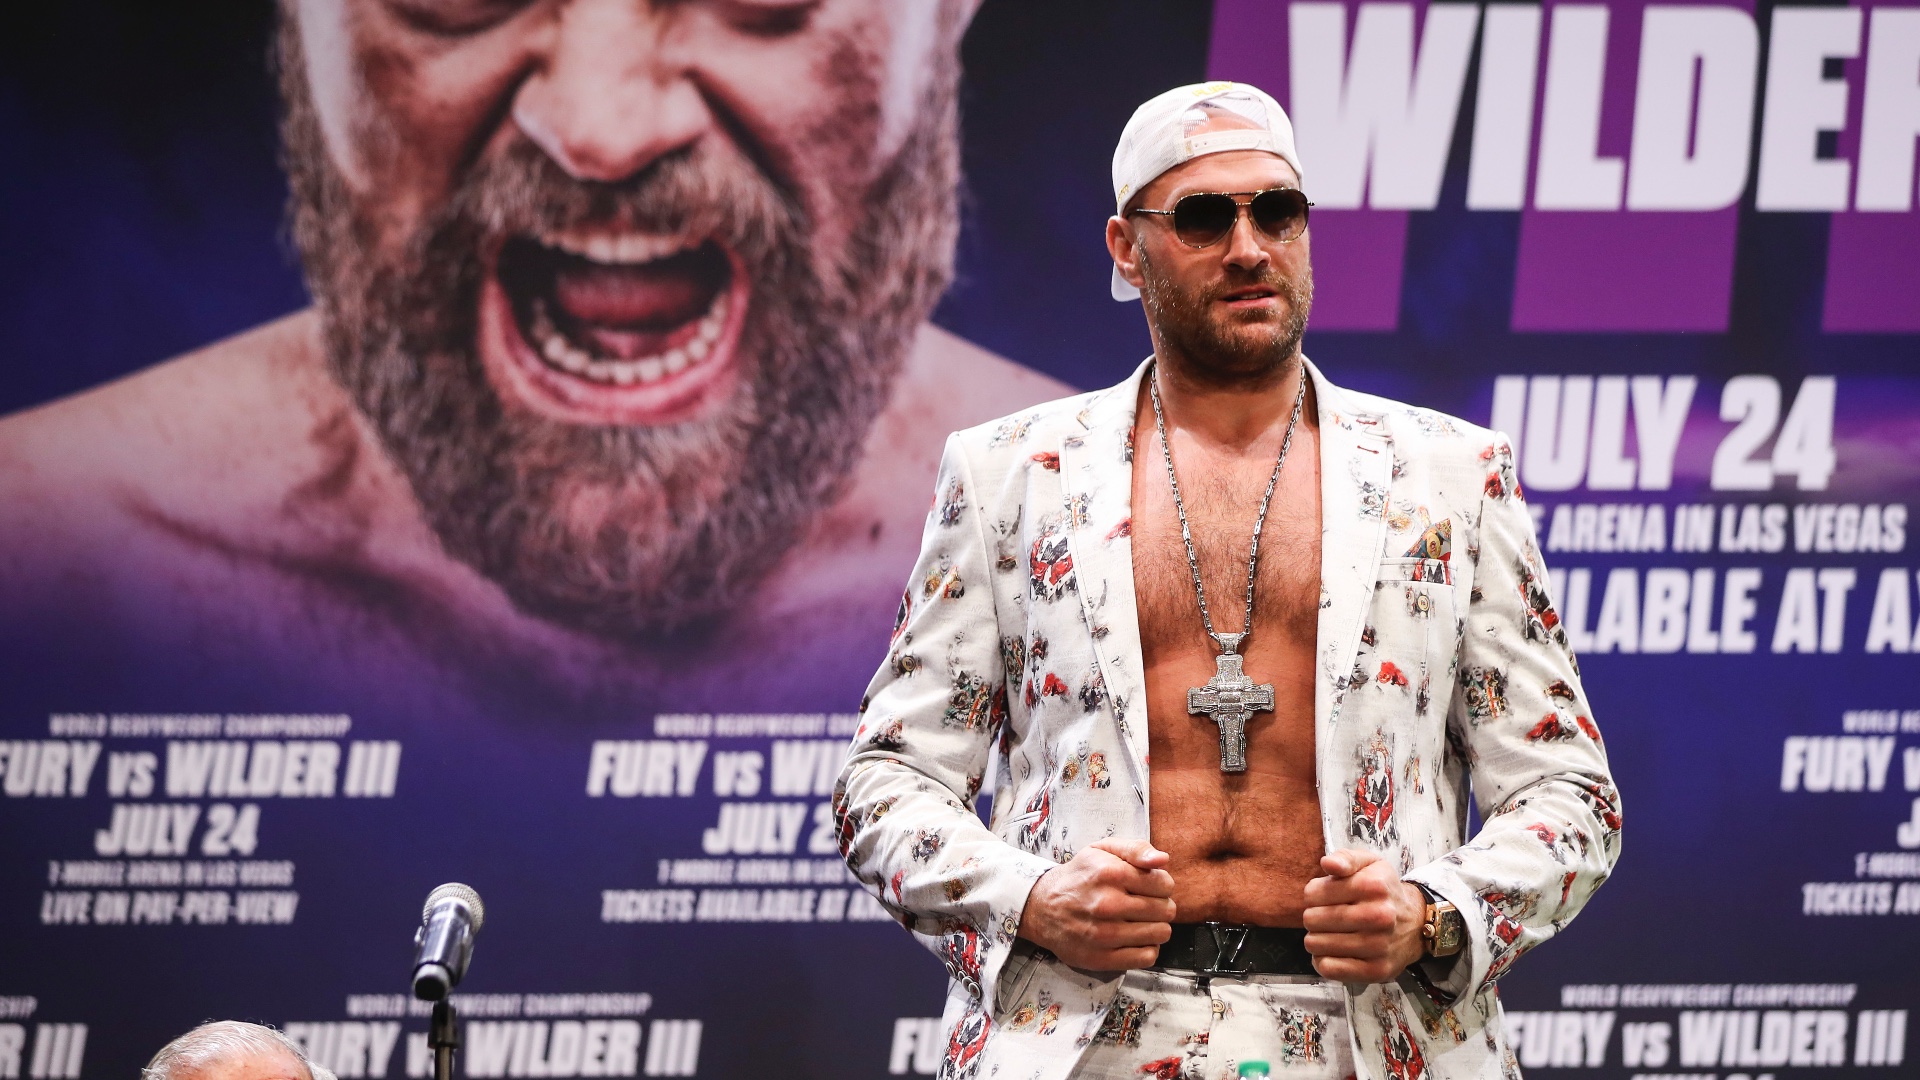 After Deontay Wilder, who will Tyson Fury fight?Potential next opponents include Anthony Joshua and Dillion White